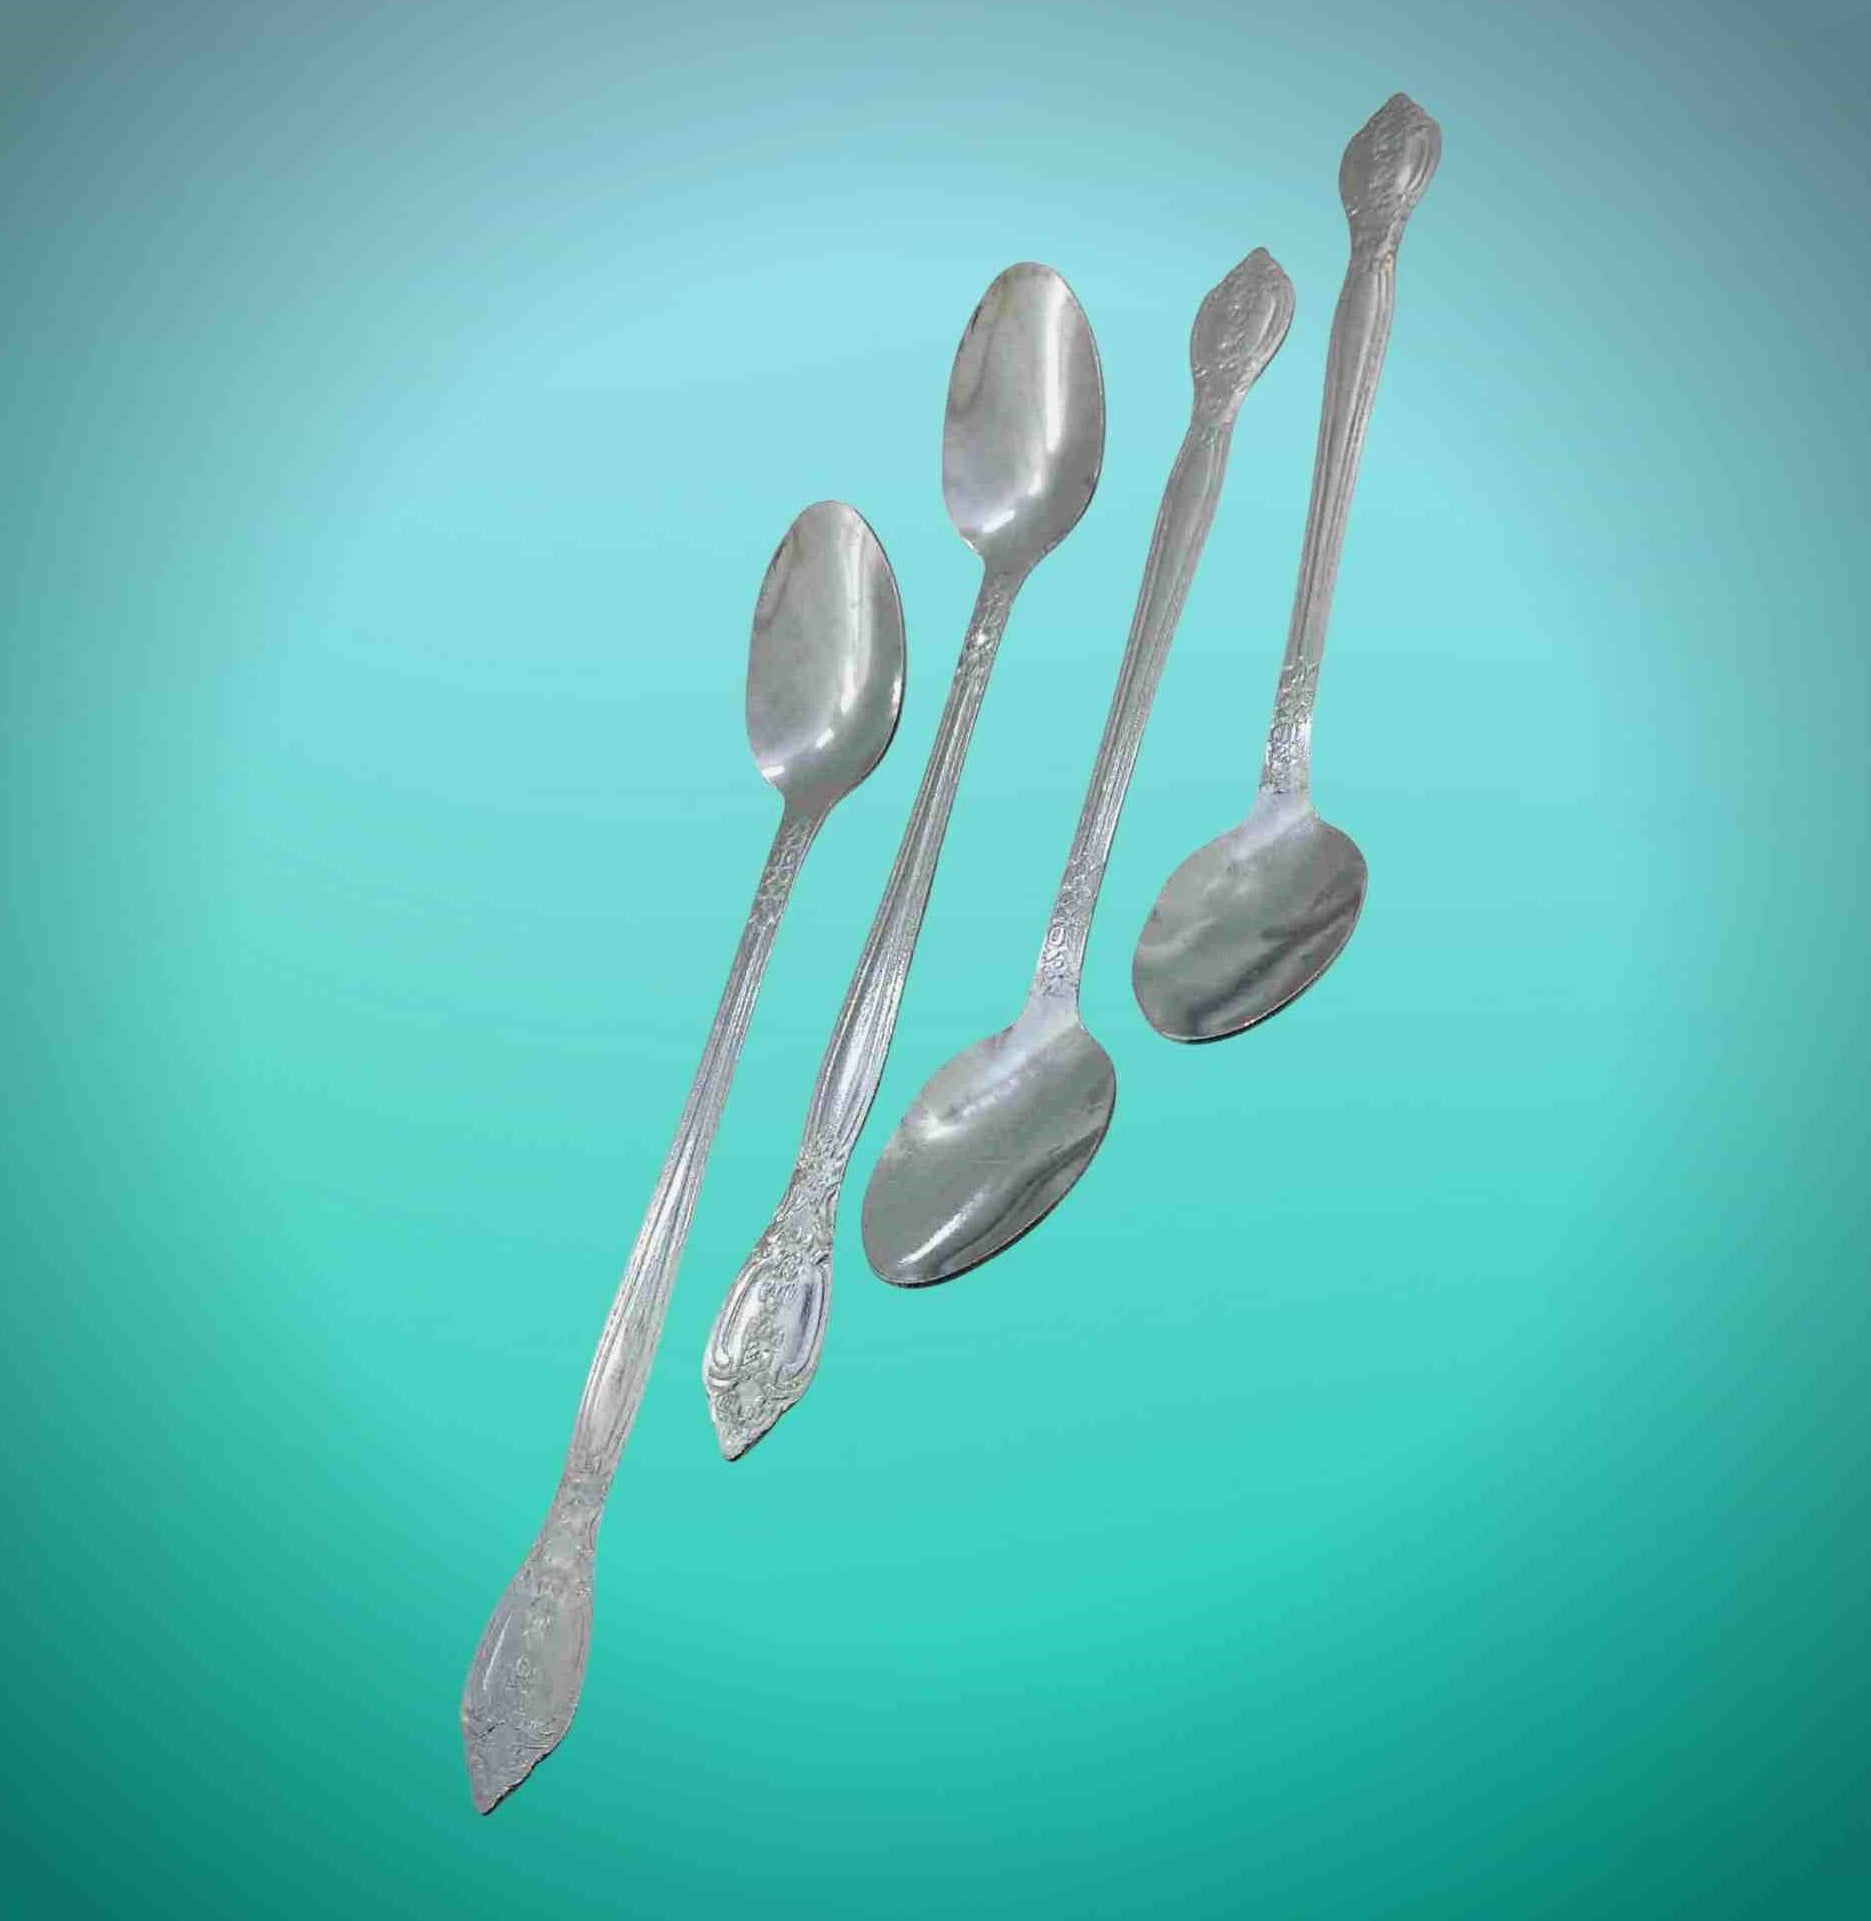 juice, drinks, faluda serving spoon Stainless steel silver color shiny long spoon